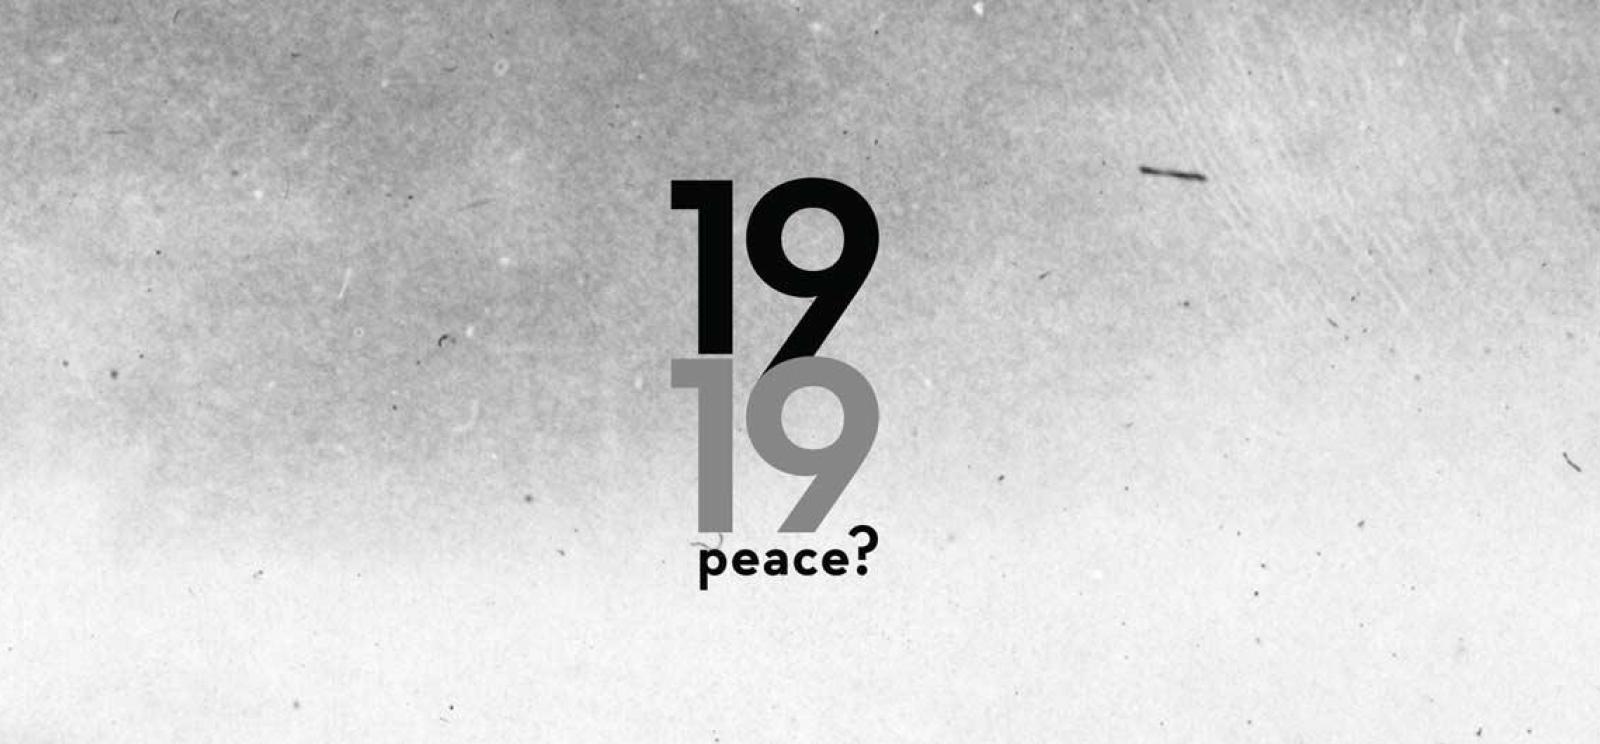 Black and white scratched gradient background. Black and gray text that reads 1919 Peace?